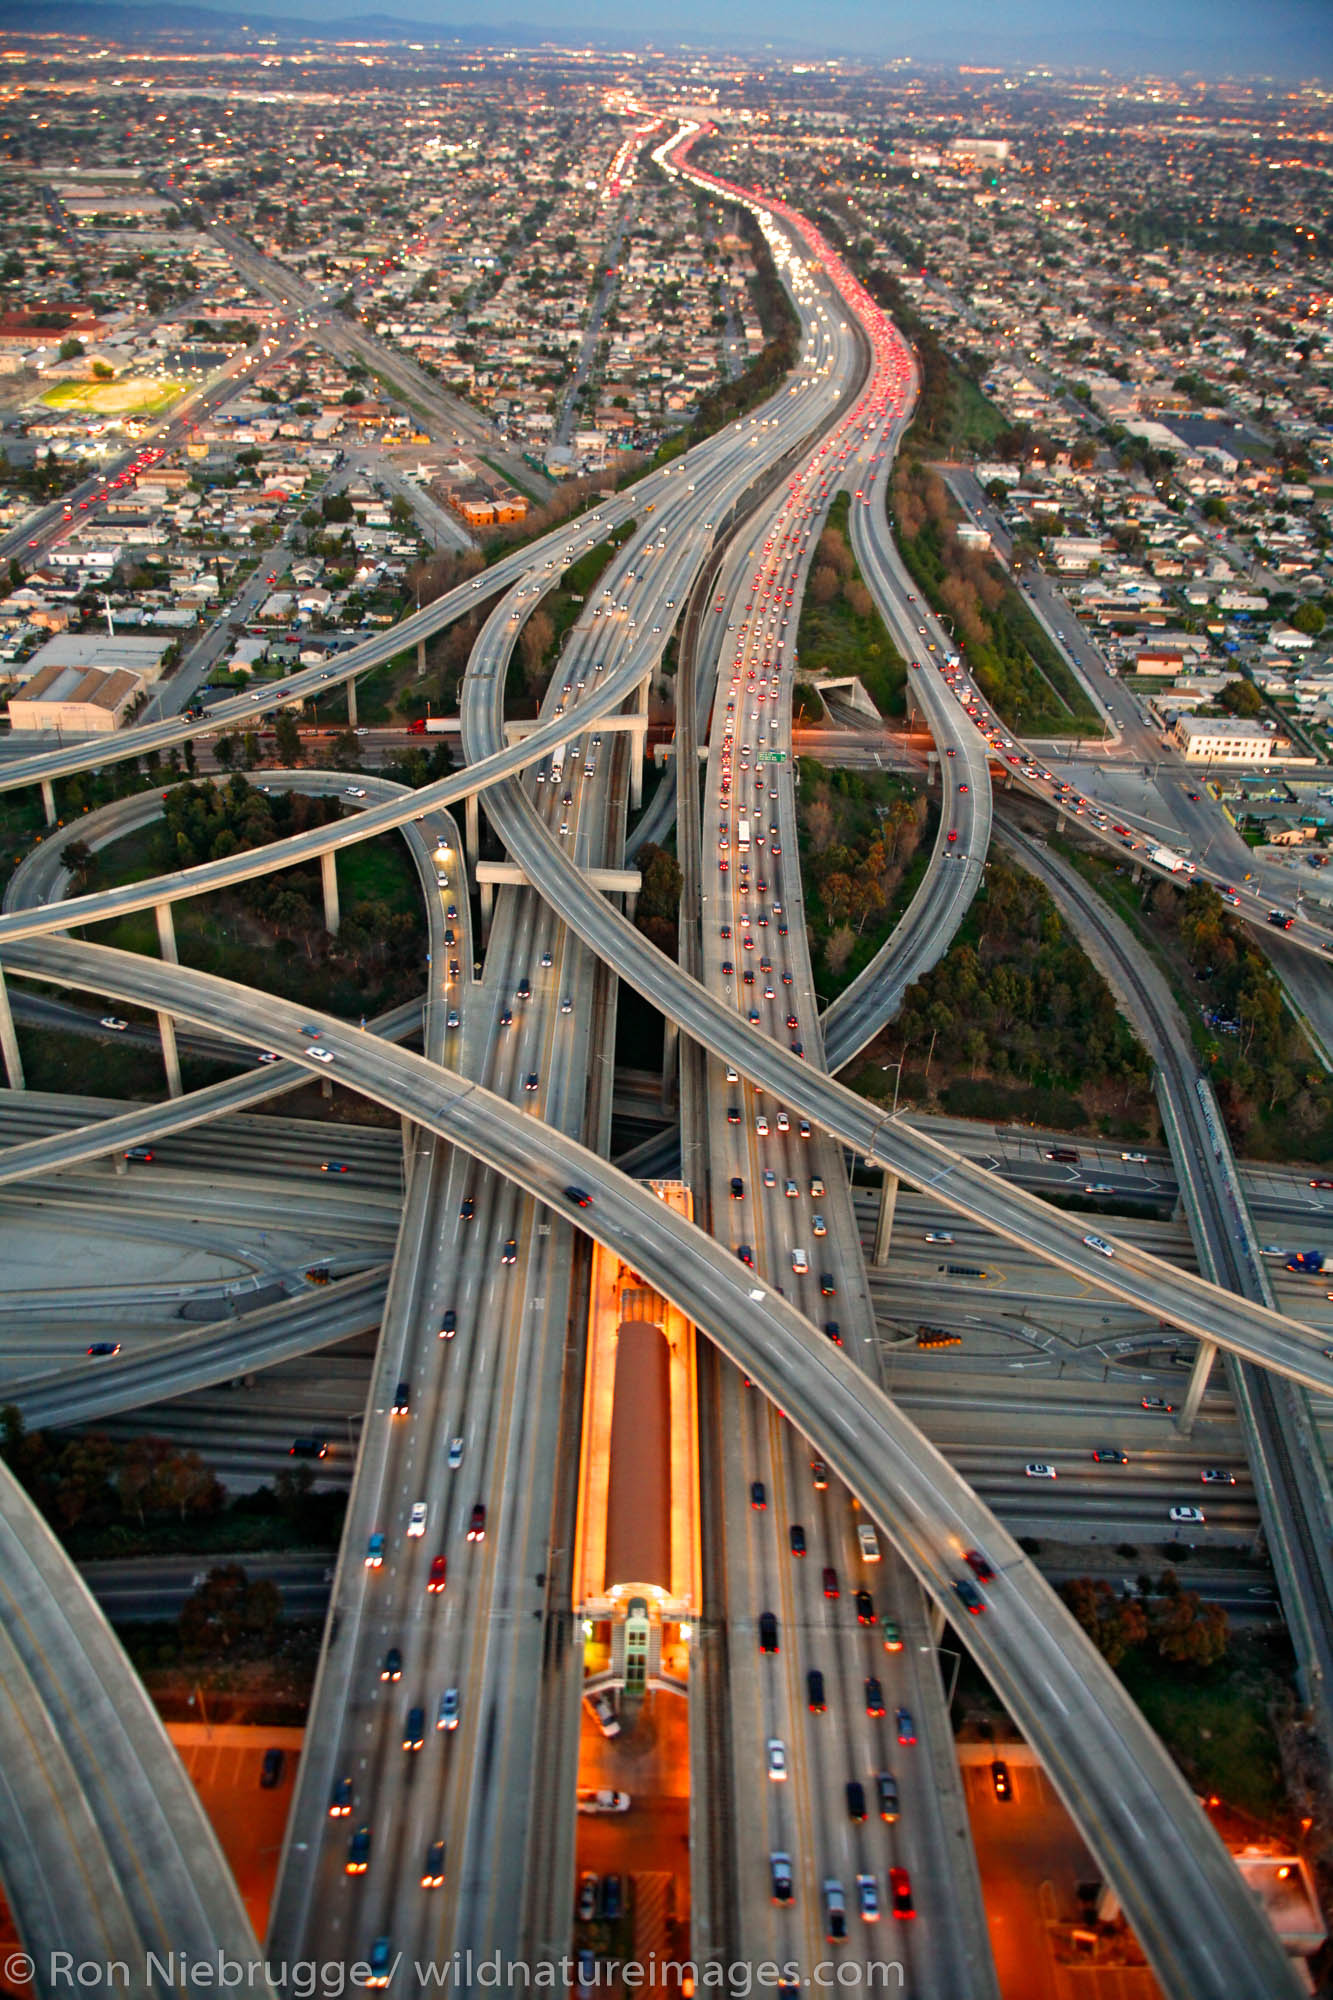 Aerial view of the interchange between the Harbor Freeway 110 and the Glenn Anderson Freeway 105, Los Angeles, California.